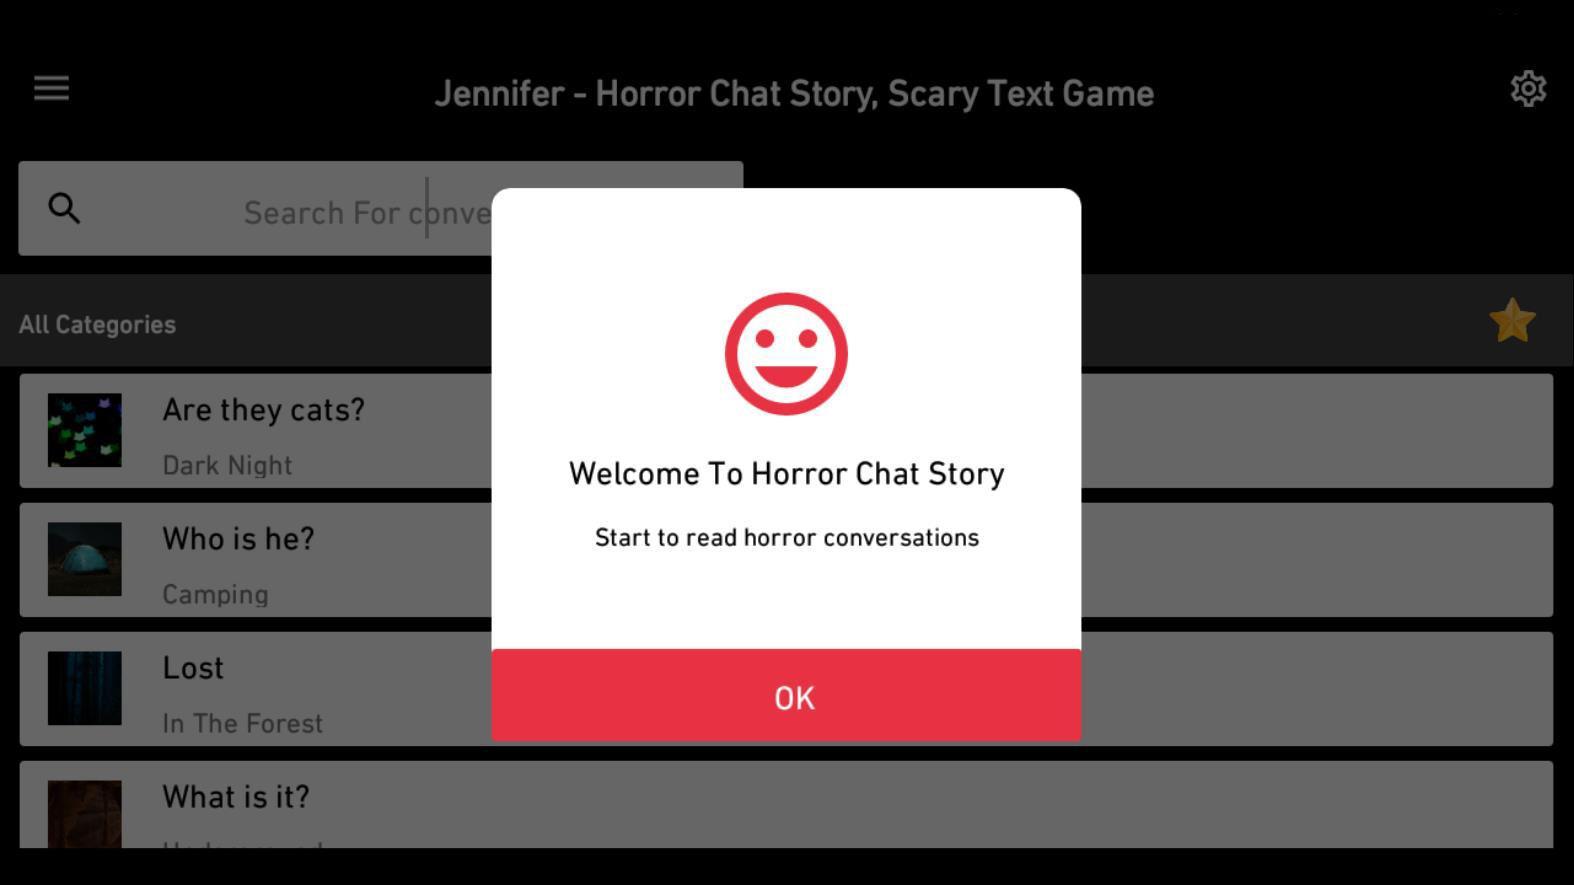 Chat stories. Scary text